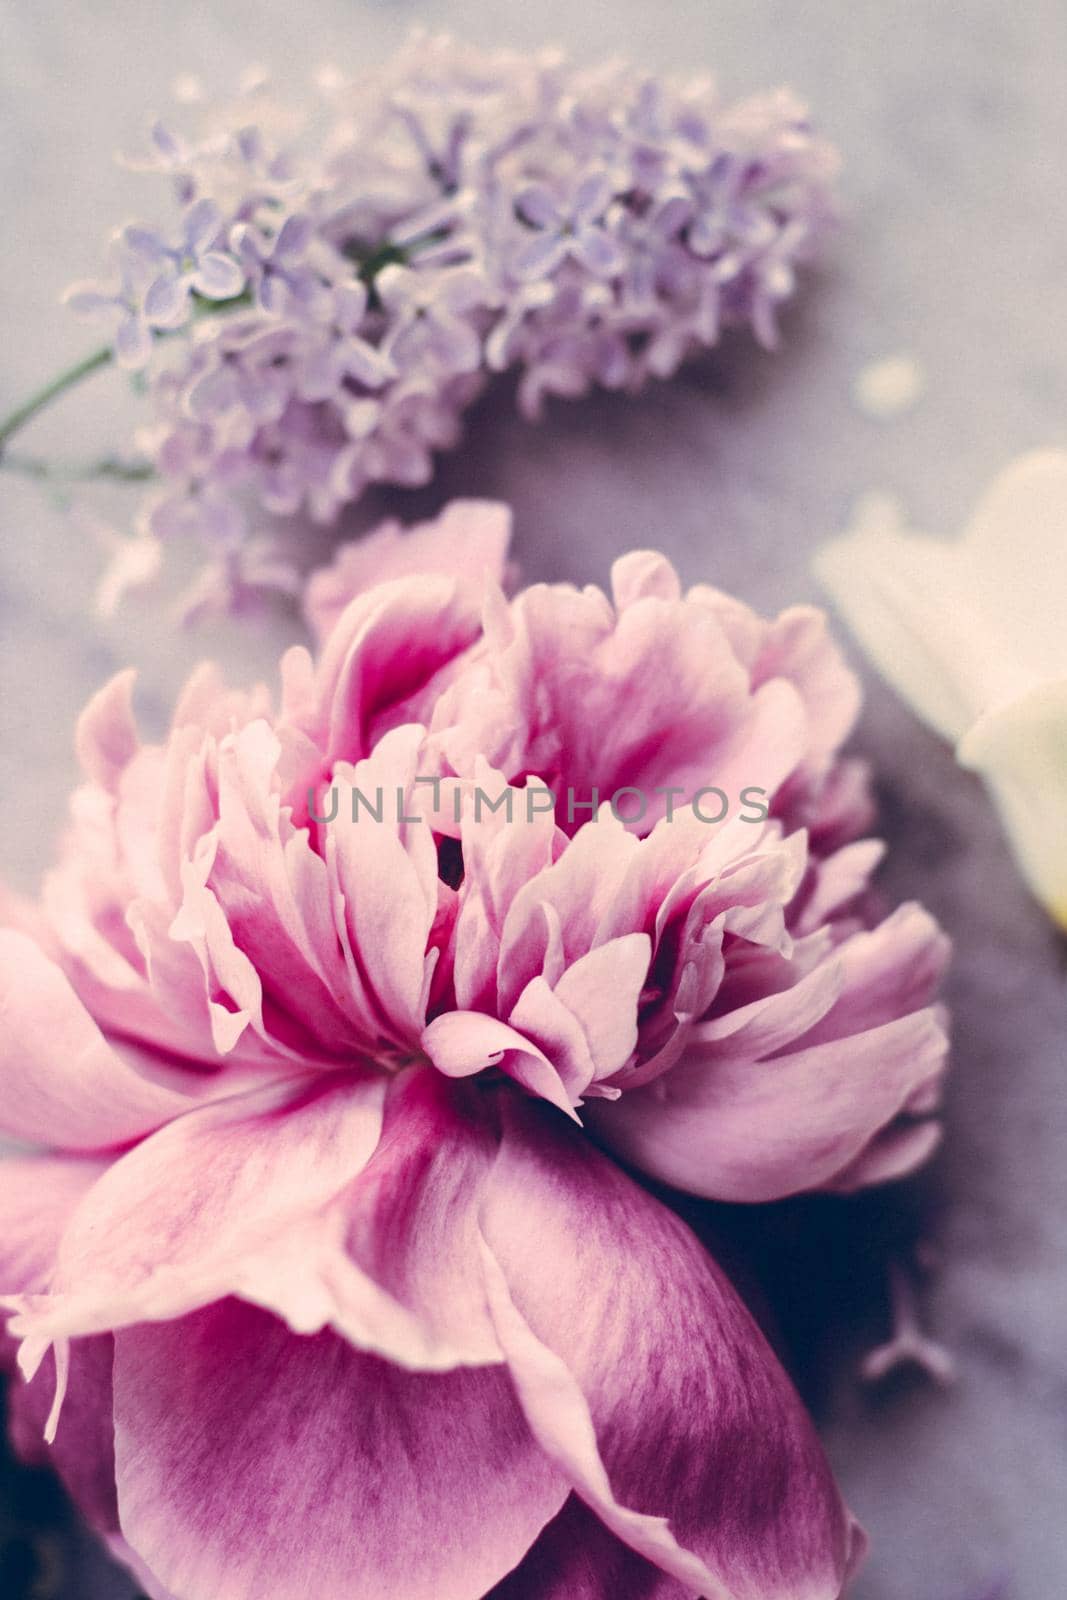 floral blossom - wedding, holiday and flower garden styled concept, elegant visuals